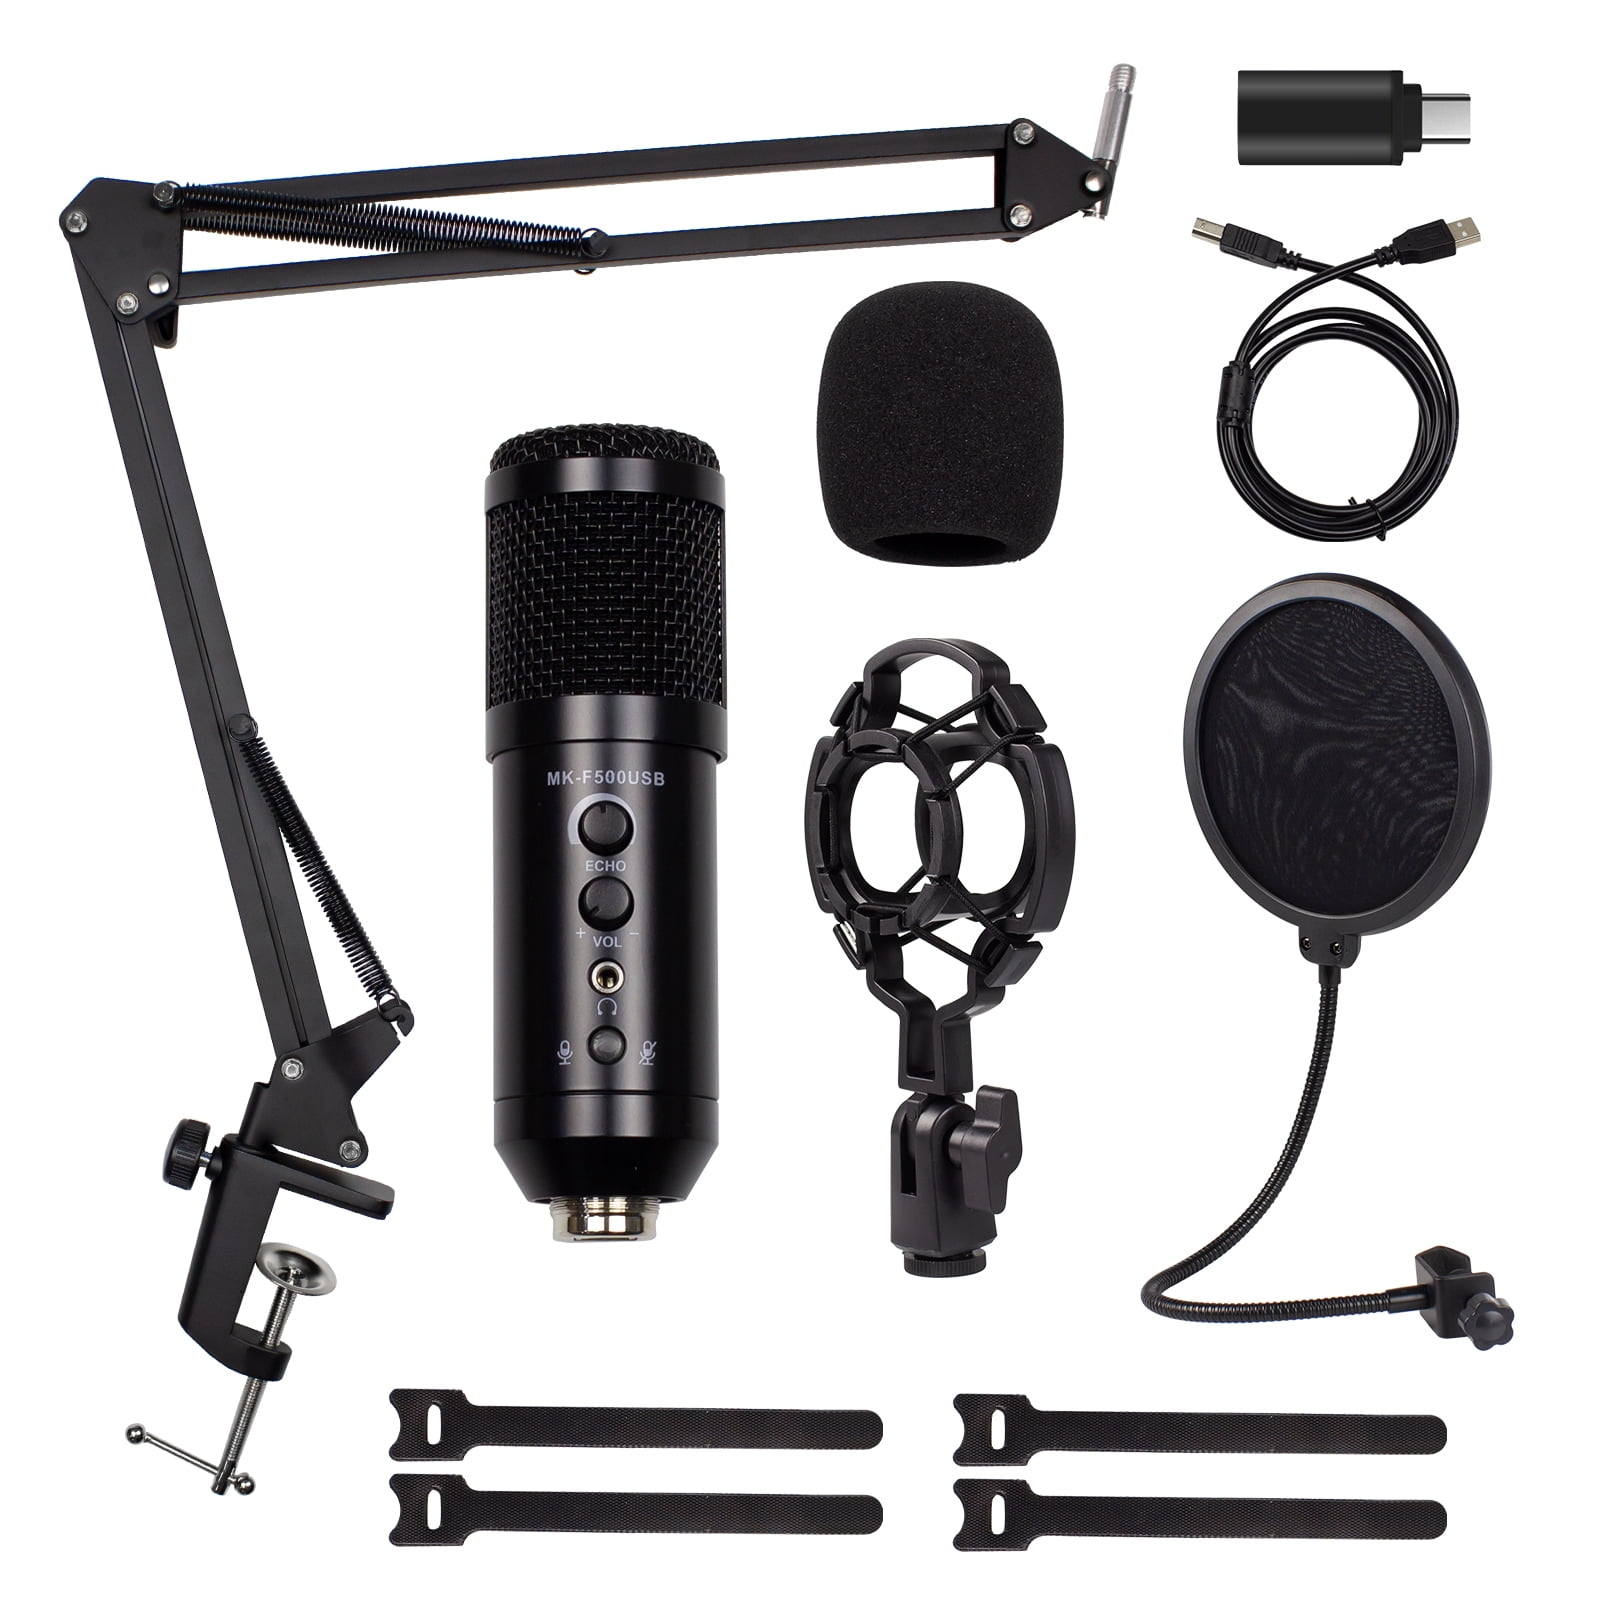 Goldwing USB Microphone Condenser Computer PC Gaming Podcast Kit, Streaming  Recording Vocals Cardioid Studio with Headphone for MacOS, Windows, 